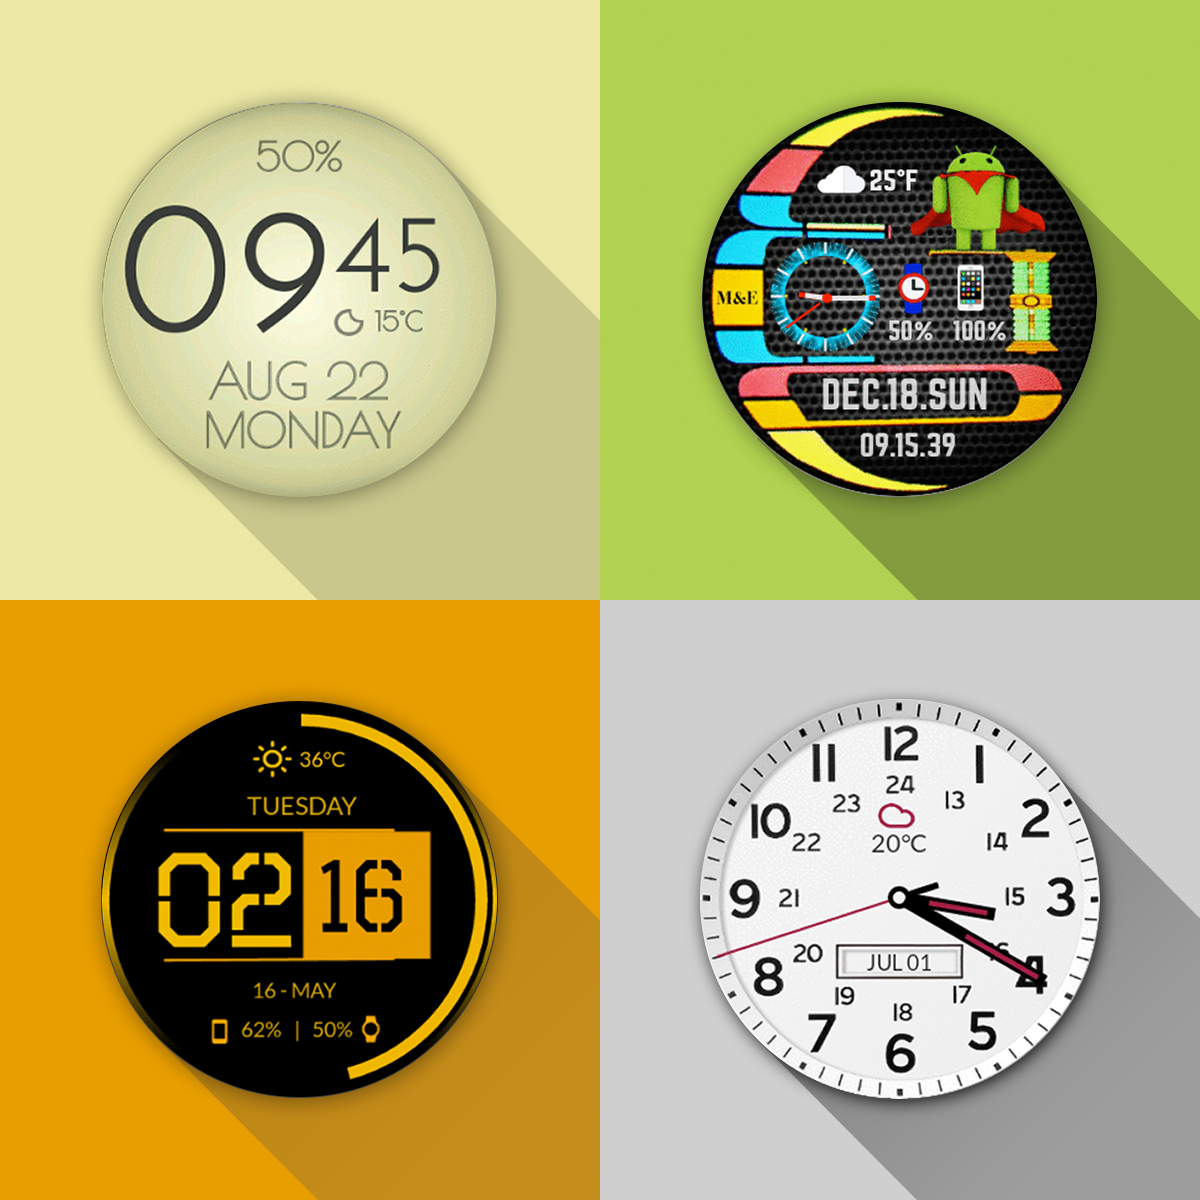 Android application Watch Face - Minimal & Elegant for Android Wear OS screenshort